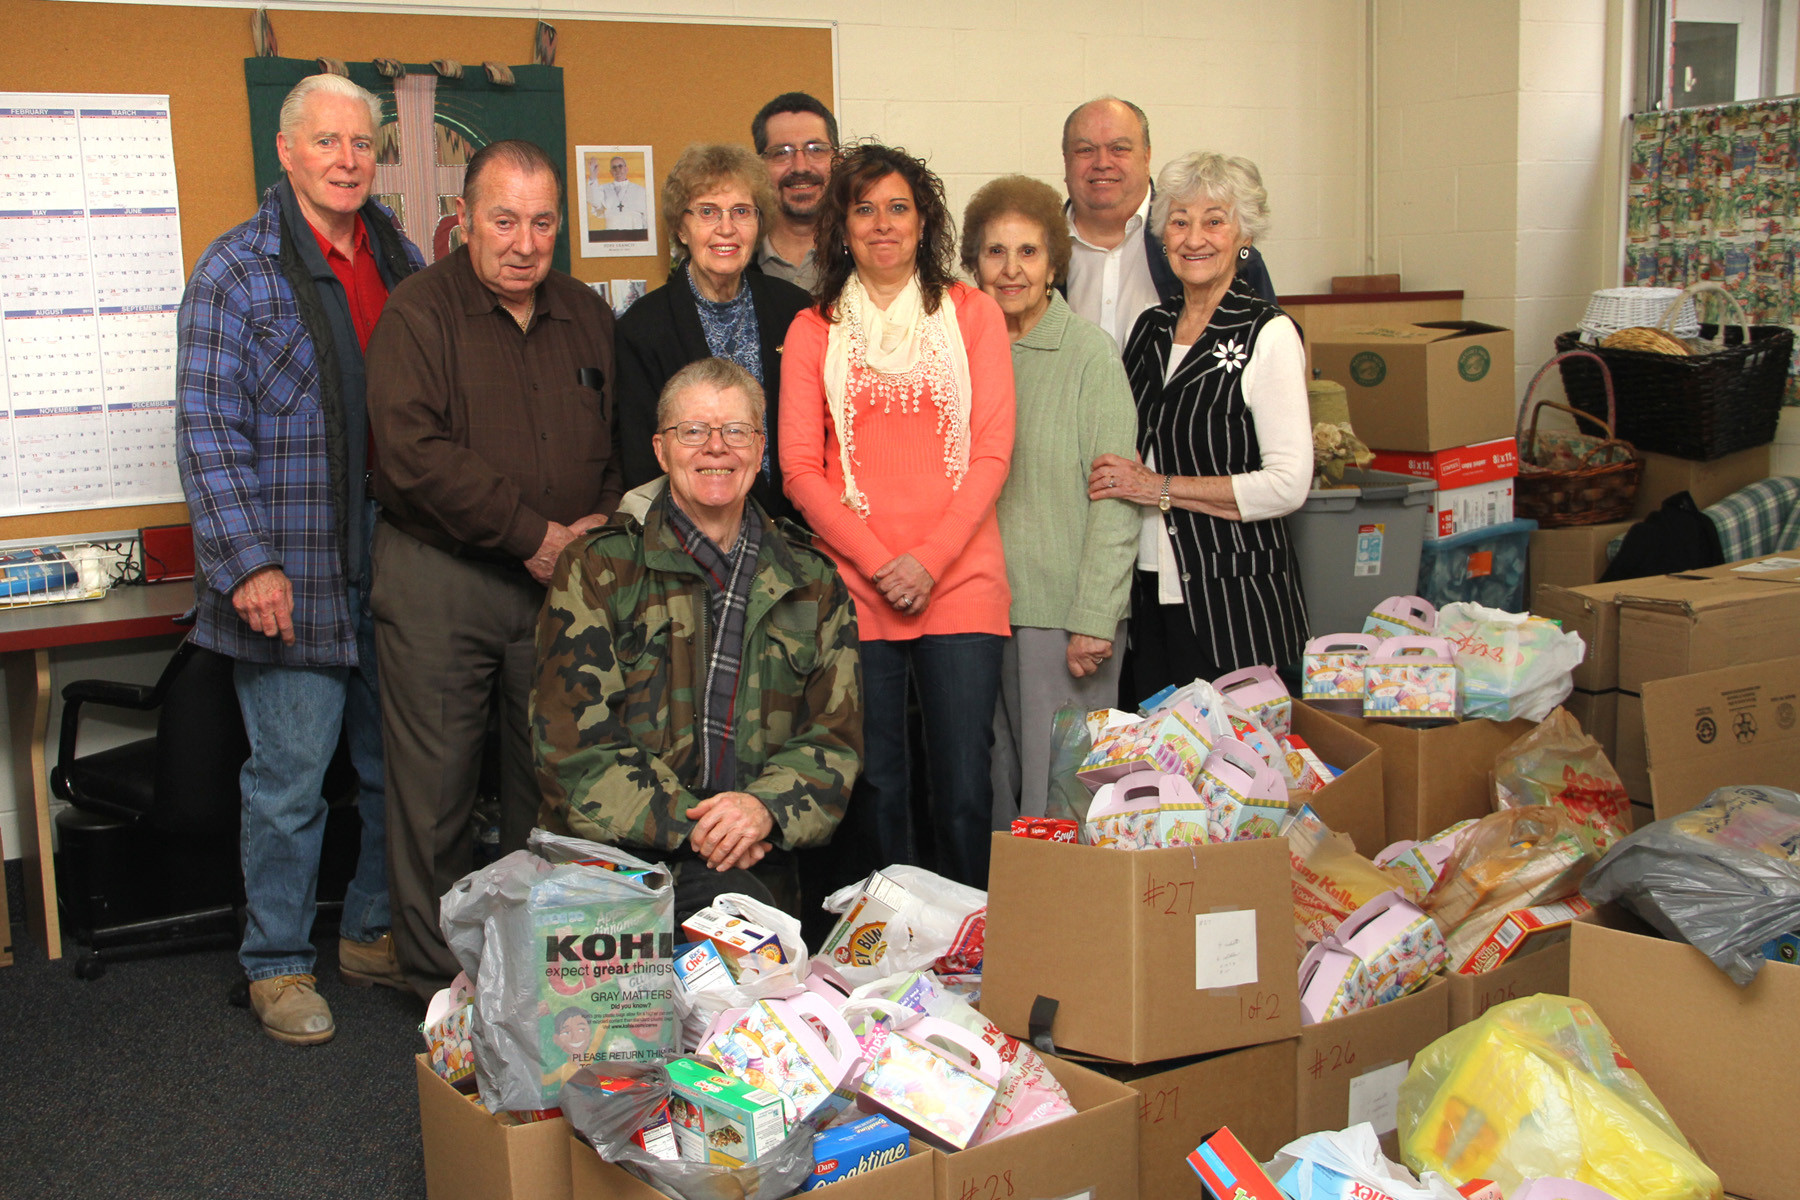 Blessed Sacrament Parish Outreach Center director Judy Miccio, fourth from right, is joined by volunteers Dave McKean, Charles McLaughlin, James Cunningham, Nancy Farrington, Mark Daley, Mary Gluck, James Riley and Angelina Bonfiglio who put baskets together for needy families in Valley Stream.